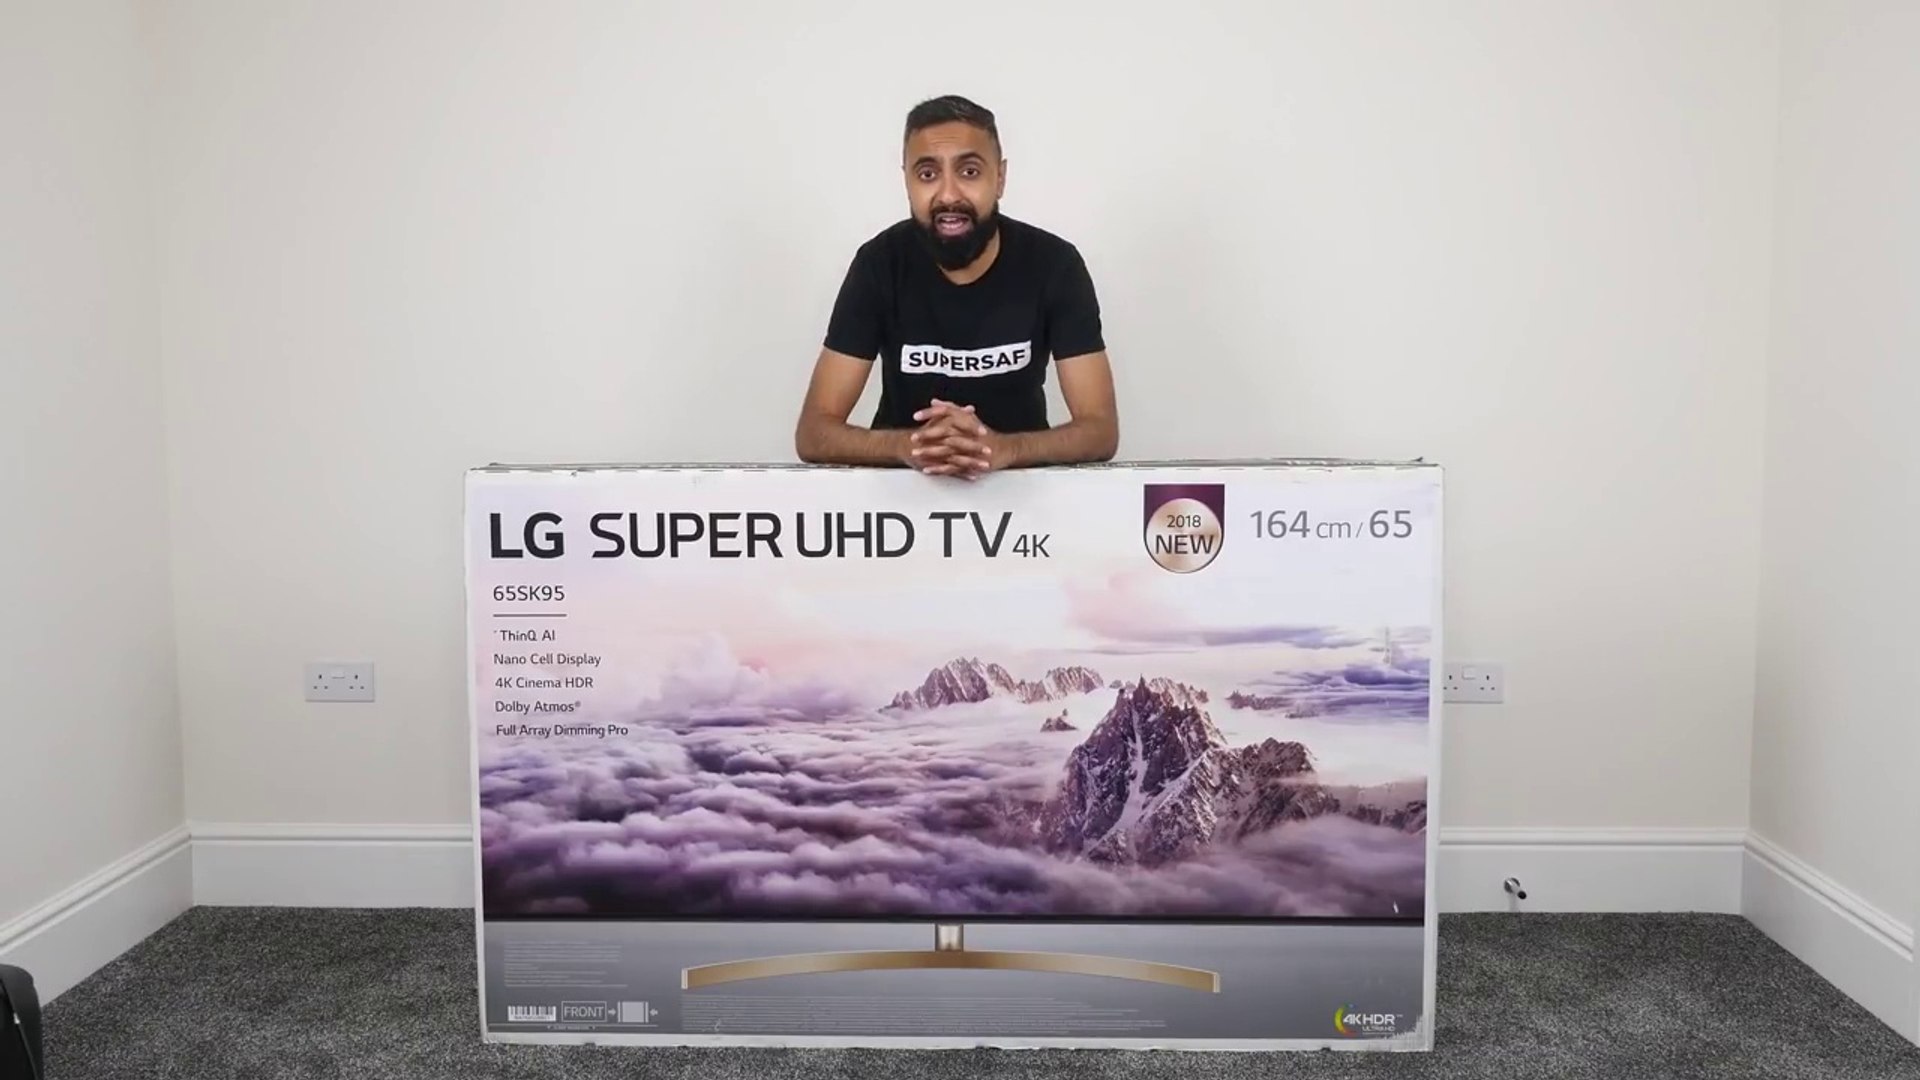 2018 NEW LG SUPER UHD TV 65- UNBOXING SuperSaf TV - video Dailymotion